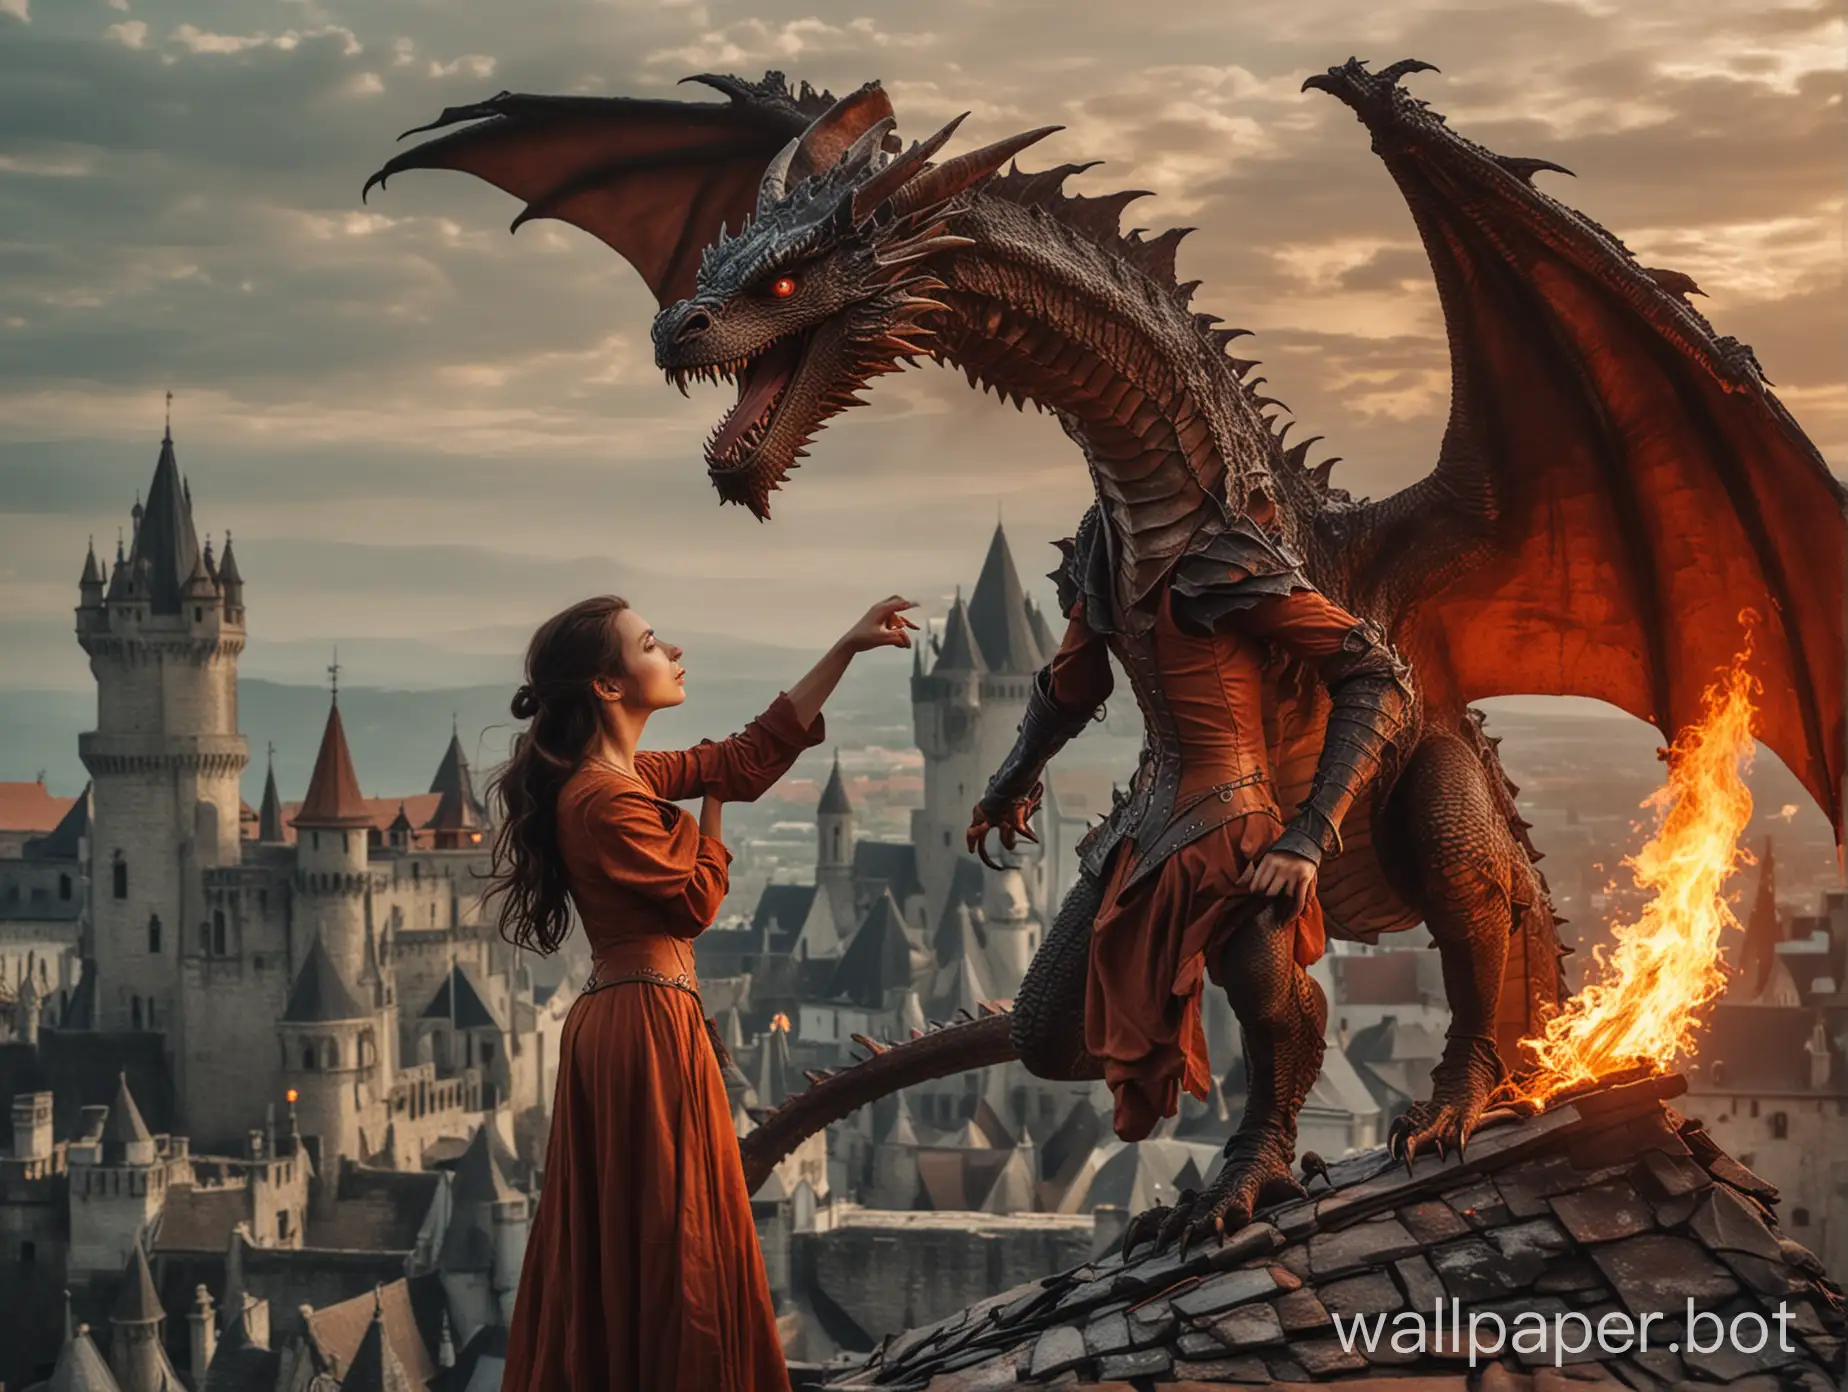 beautiful brunette girl in embrace with fire-breathing dragon stands on roof of medieval castle